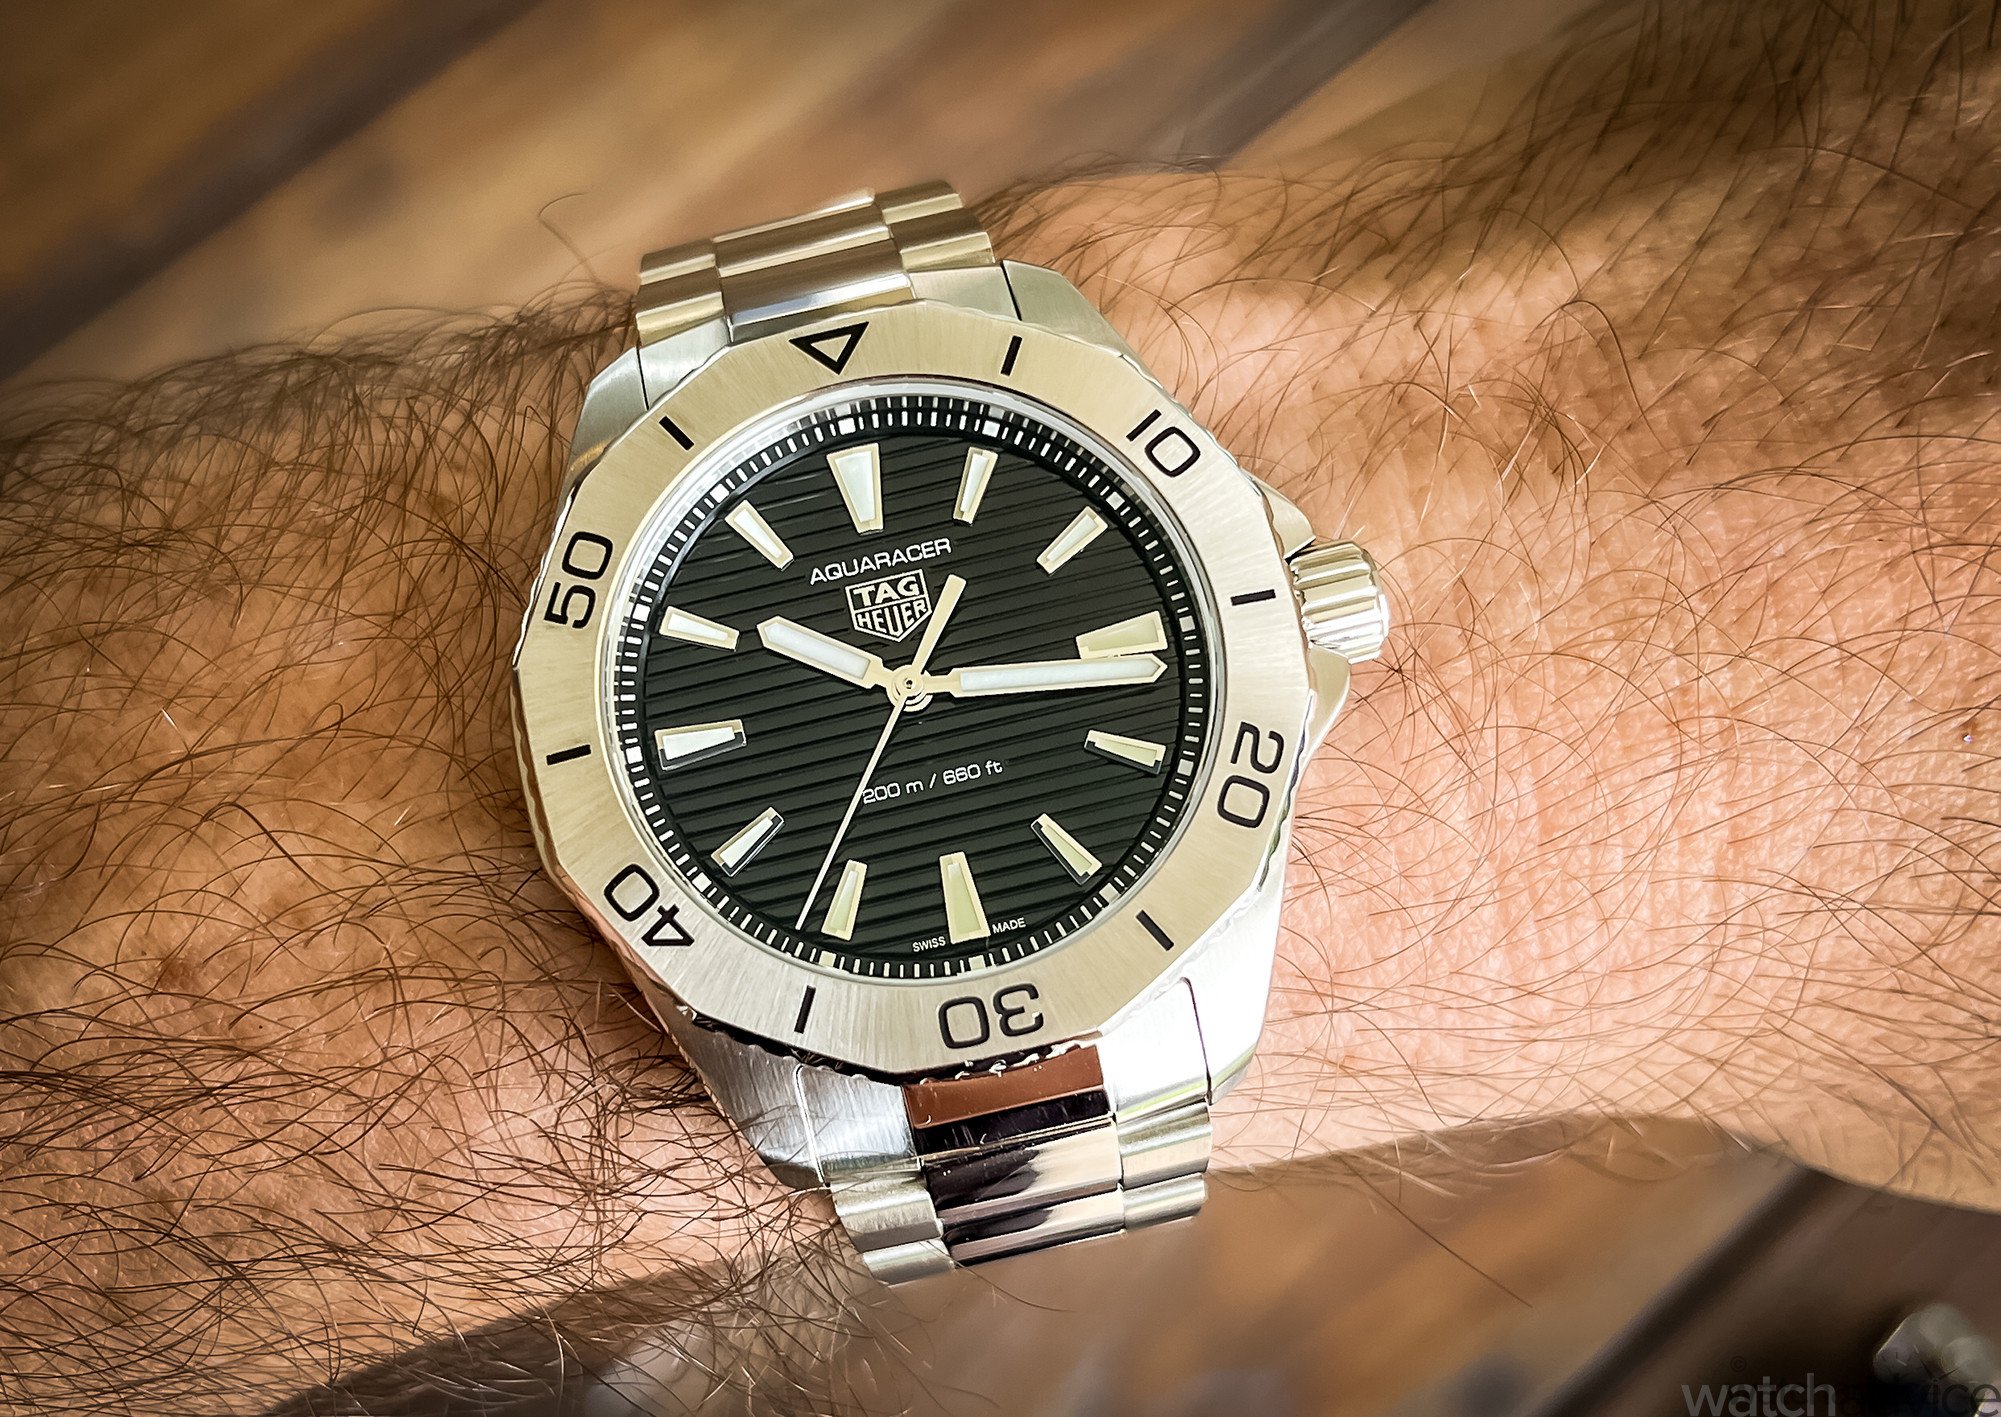 The TAG Heuer Aquaracer goes for gold